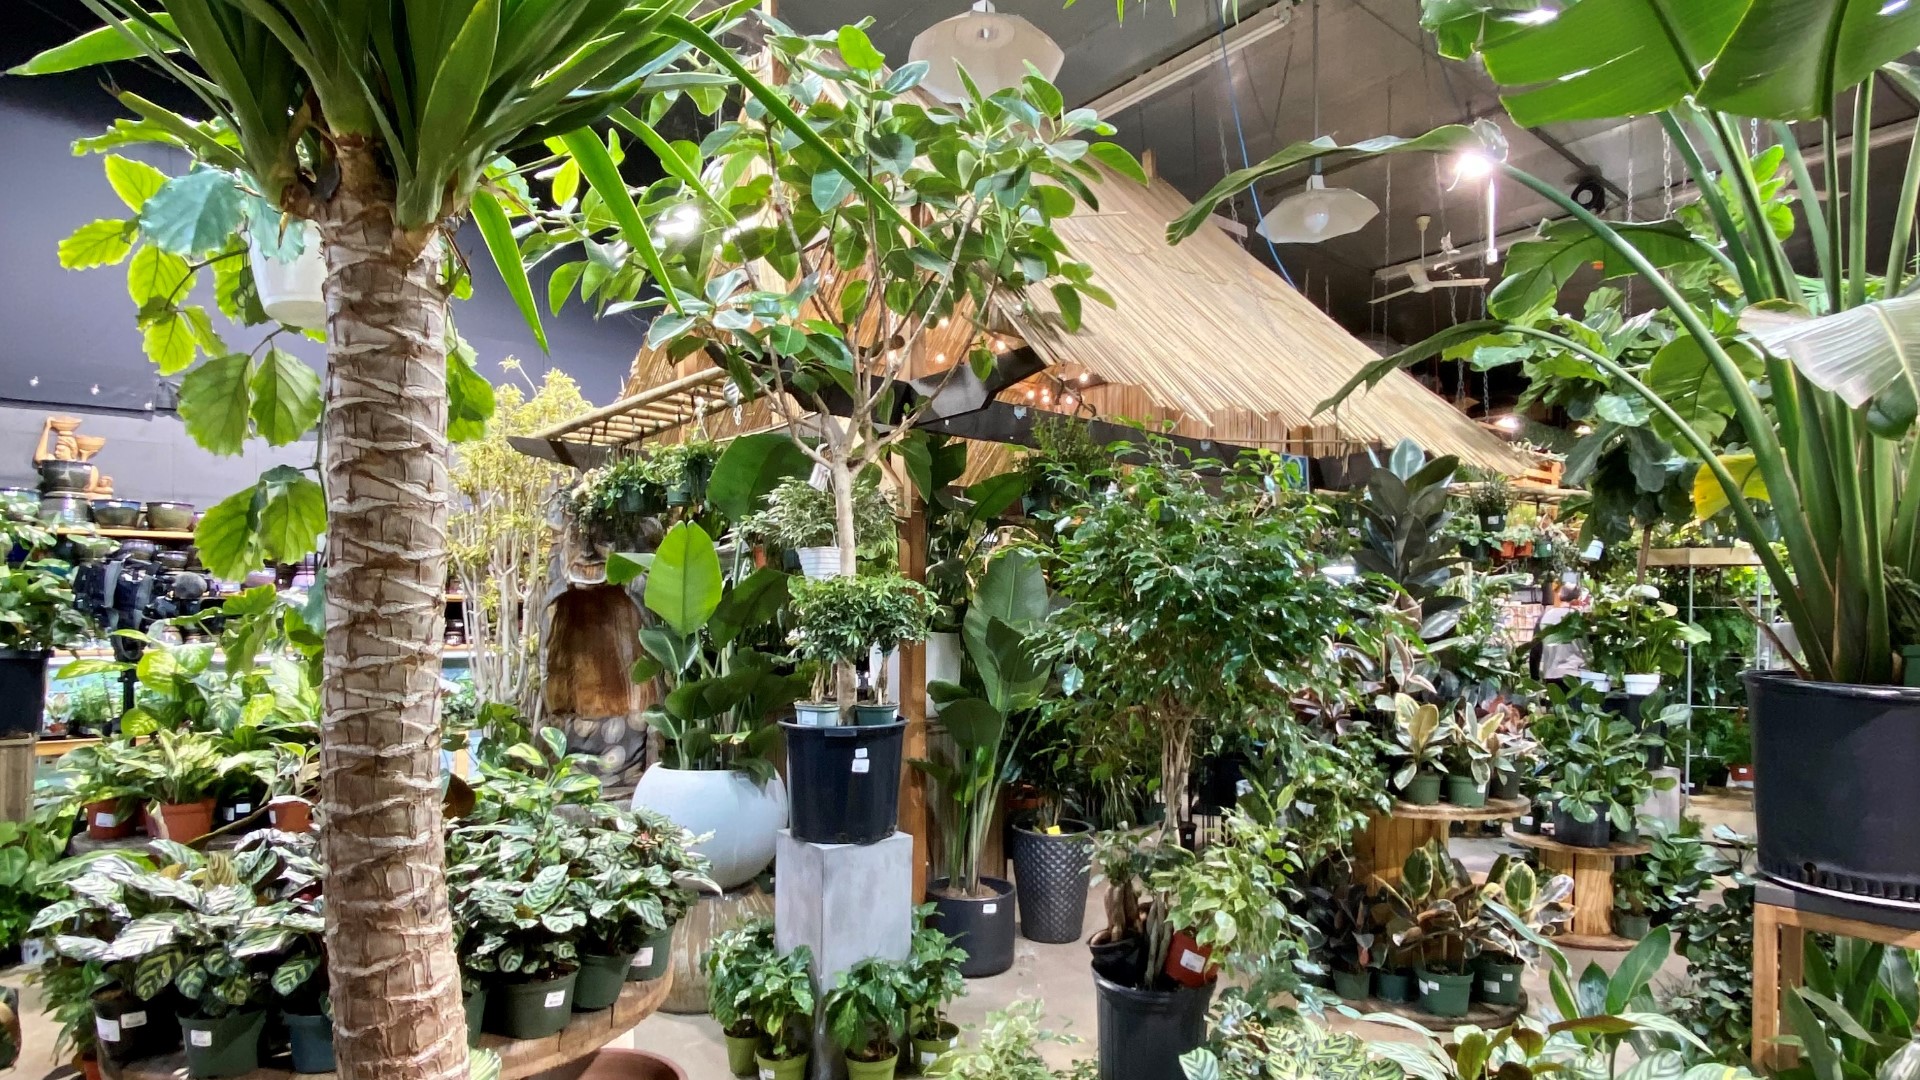 Located in the Fremont neighborhood, the indoor plant store first opened in 1970. #k5evening